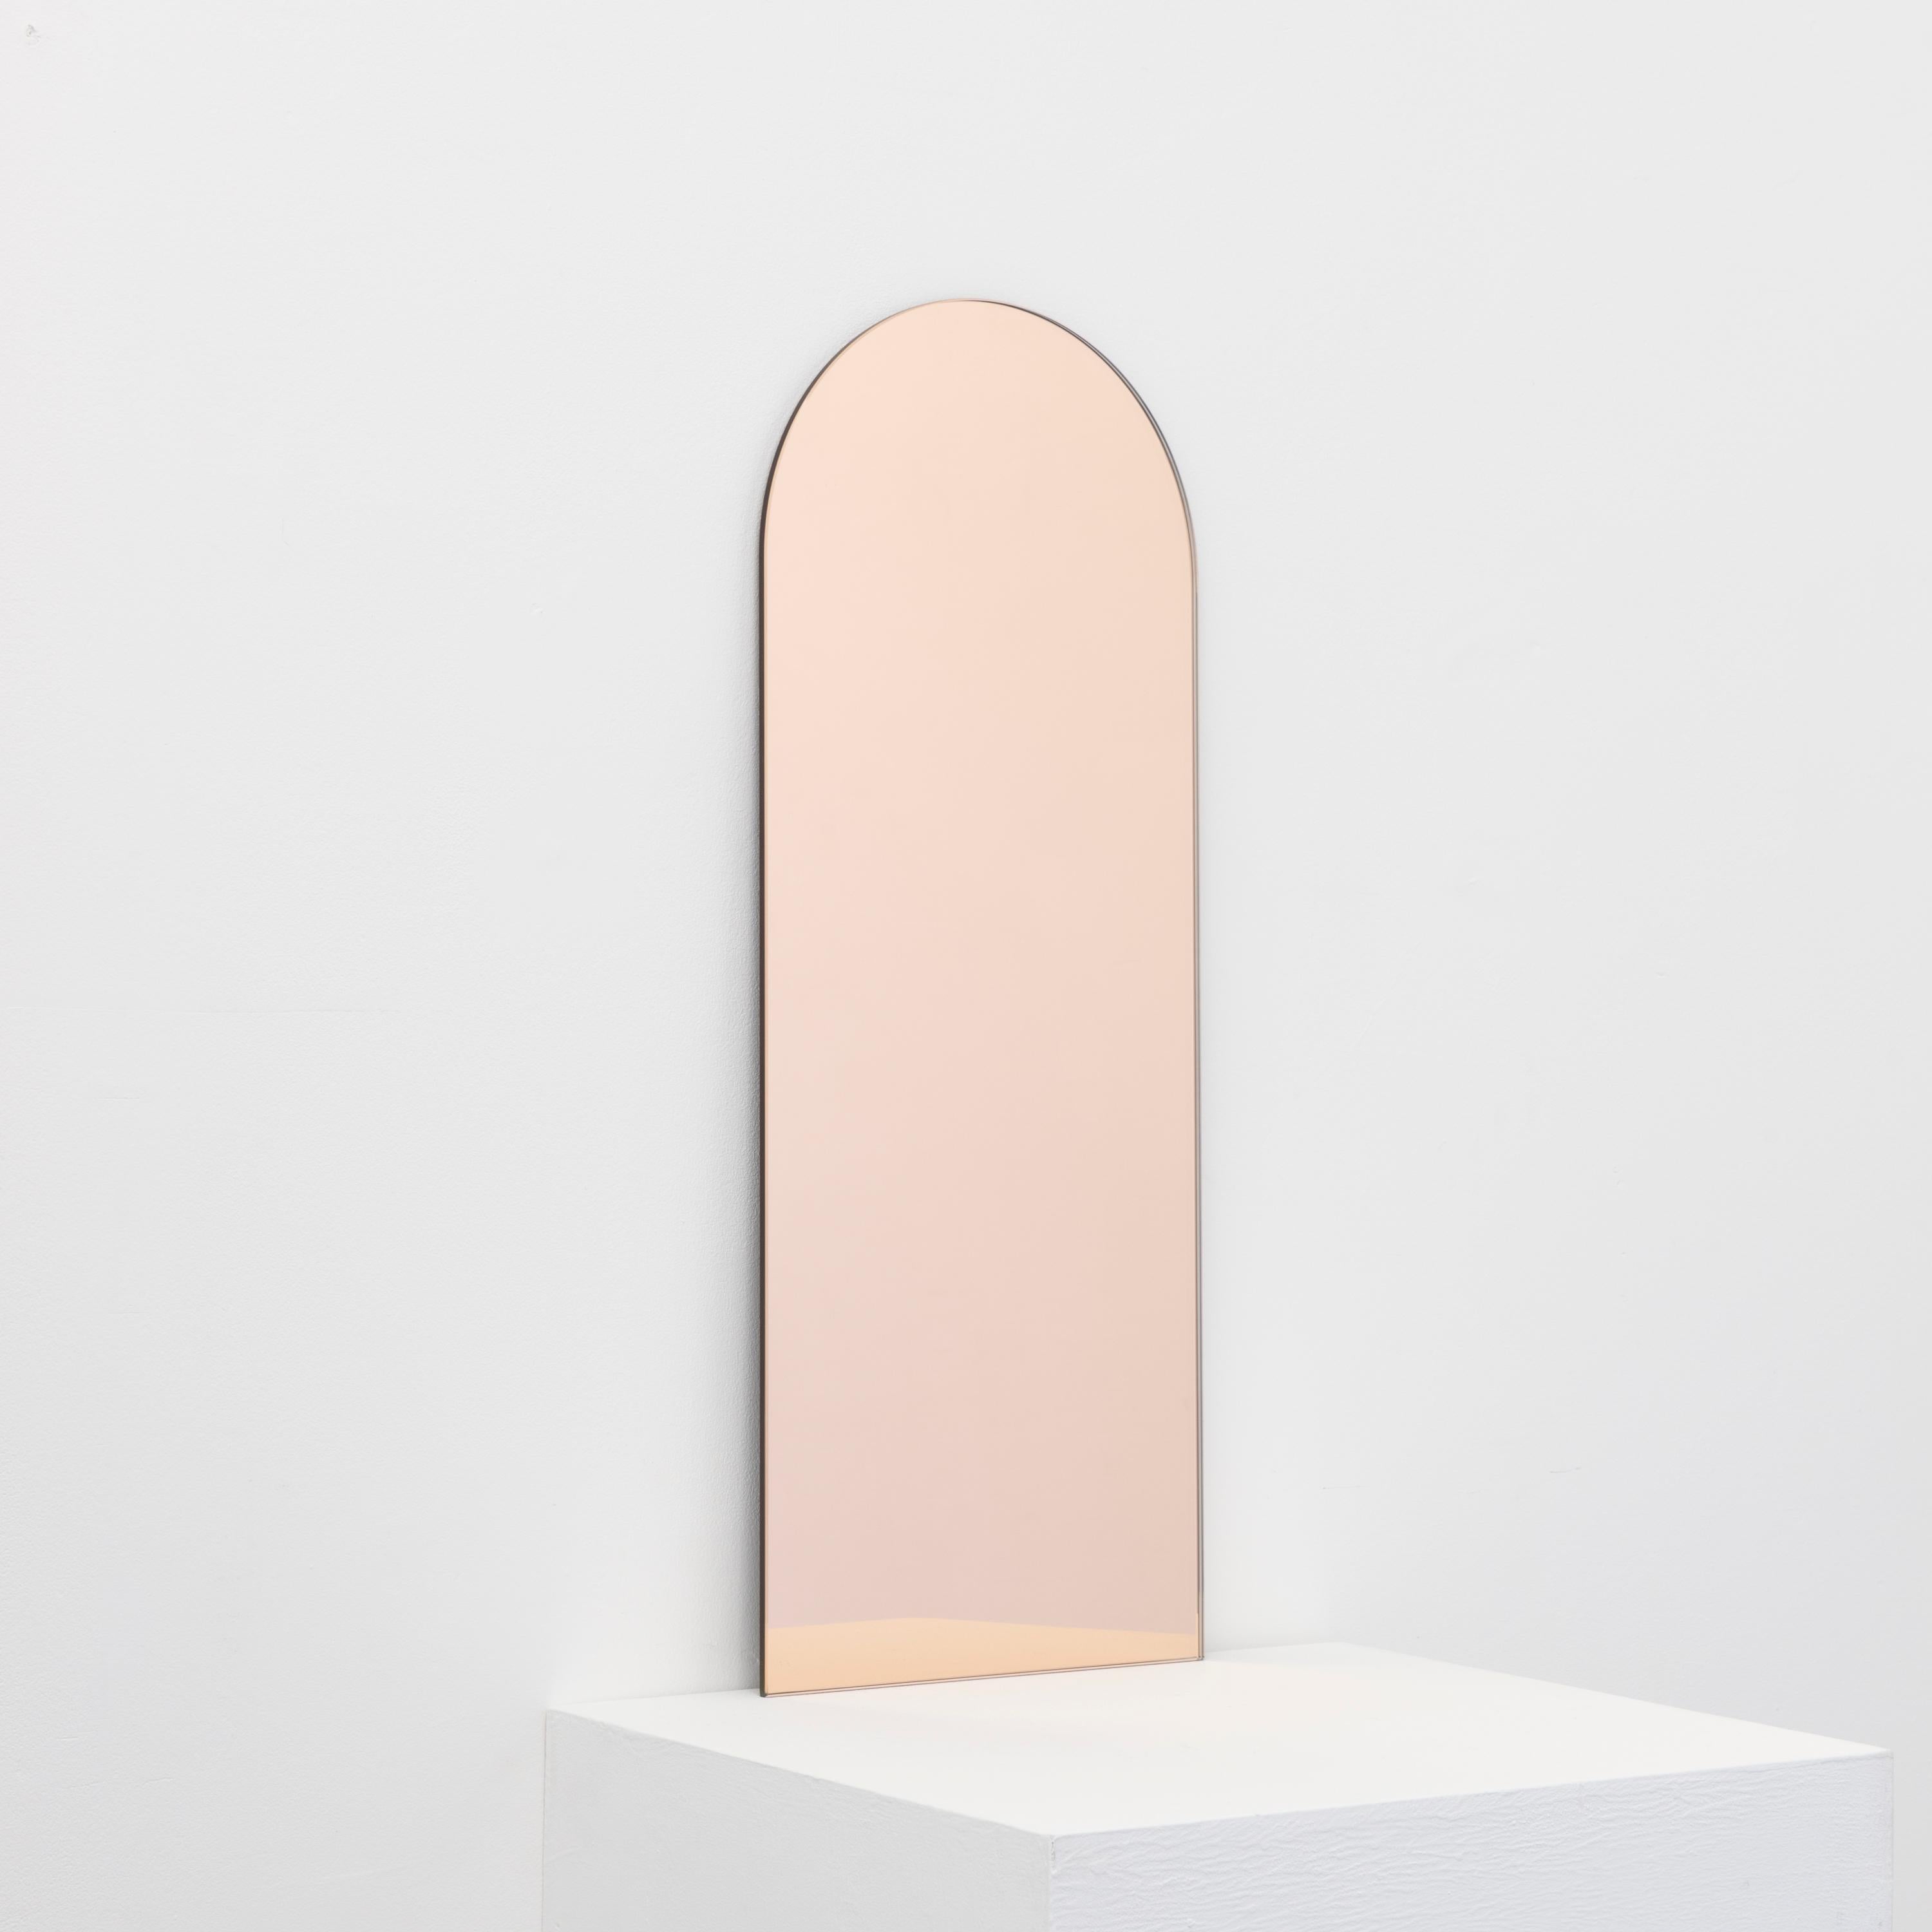 Minimalist rectangular shaped frameless rose gold mirror with a floating effect. Quality design that ensures the mirror sits perfectly parallel to the wall. Designed and made in London, UK.

Fitted with professional plates not visible once installed